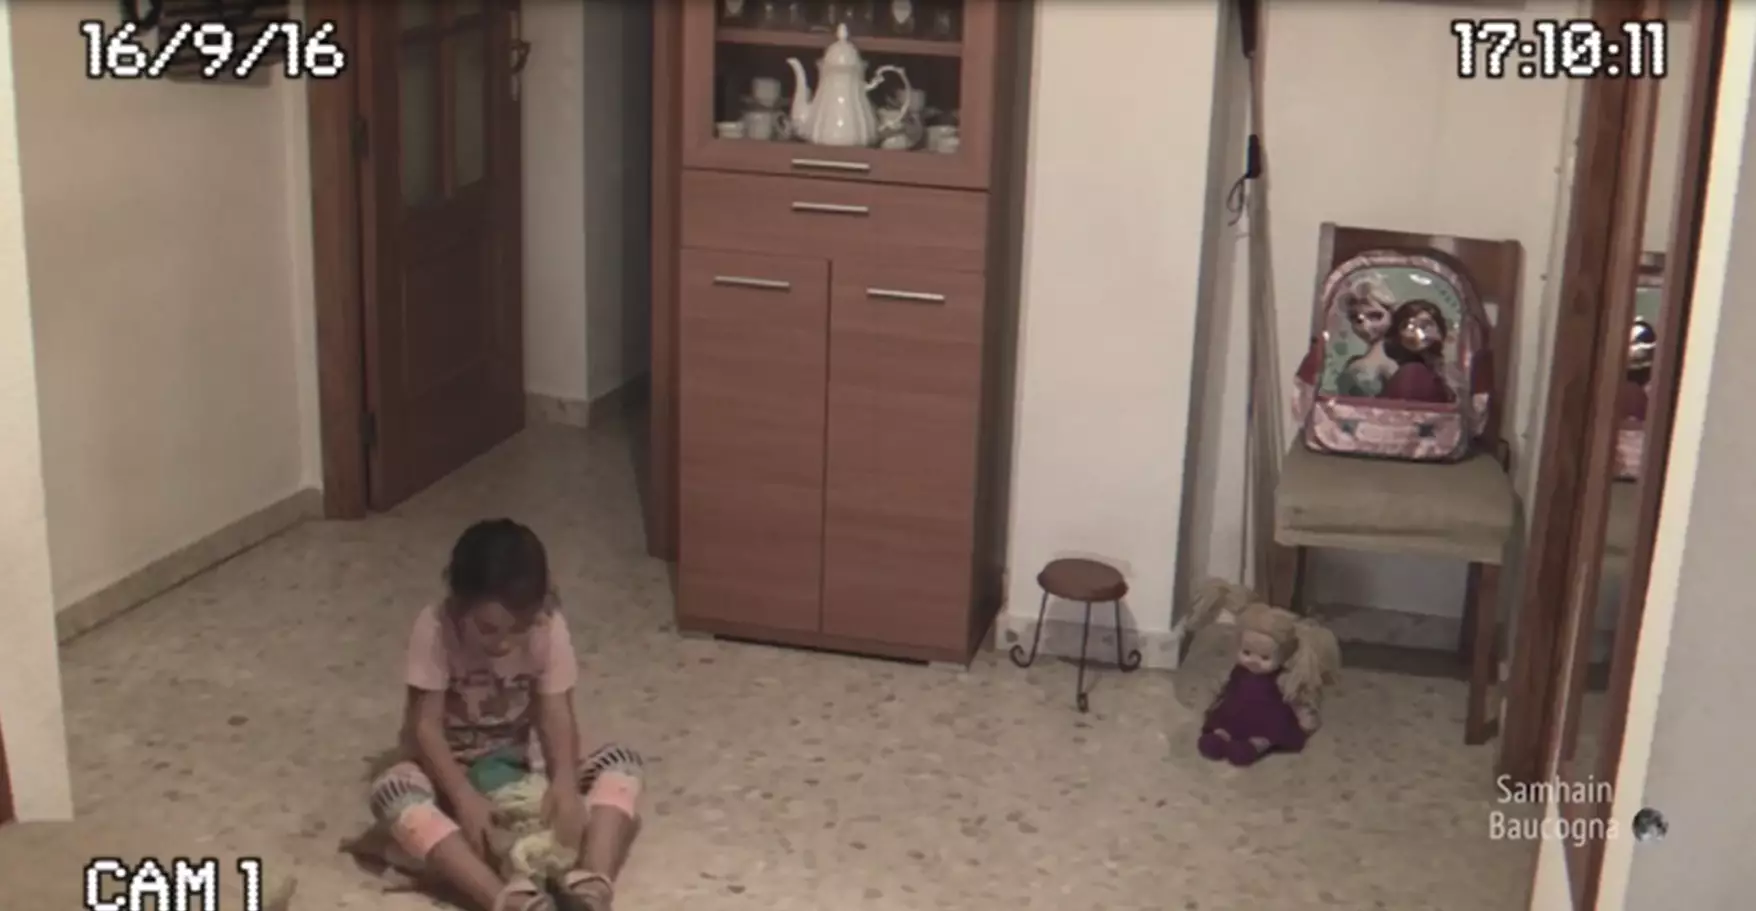 Security Camera Captures Possessed Doll On Tape